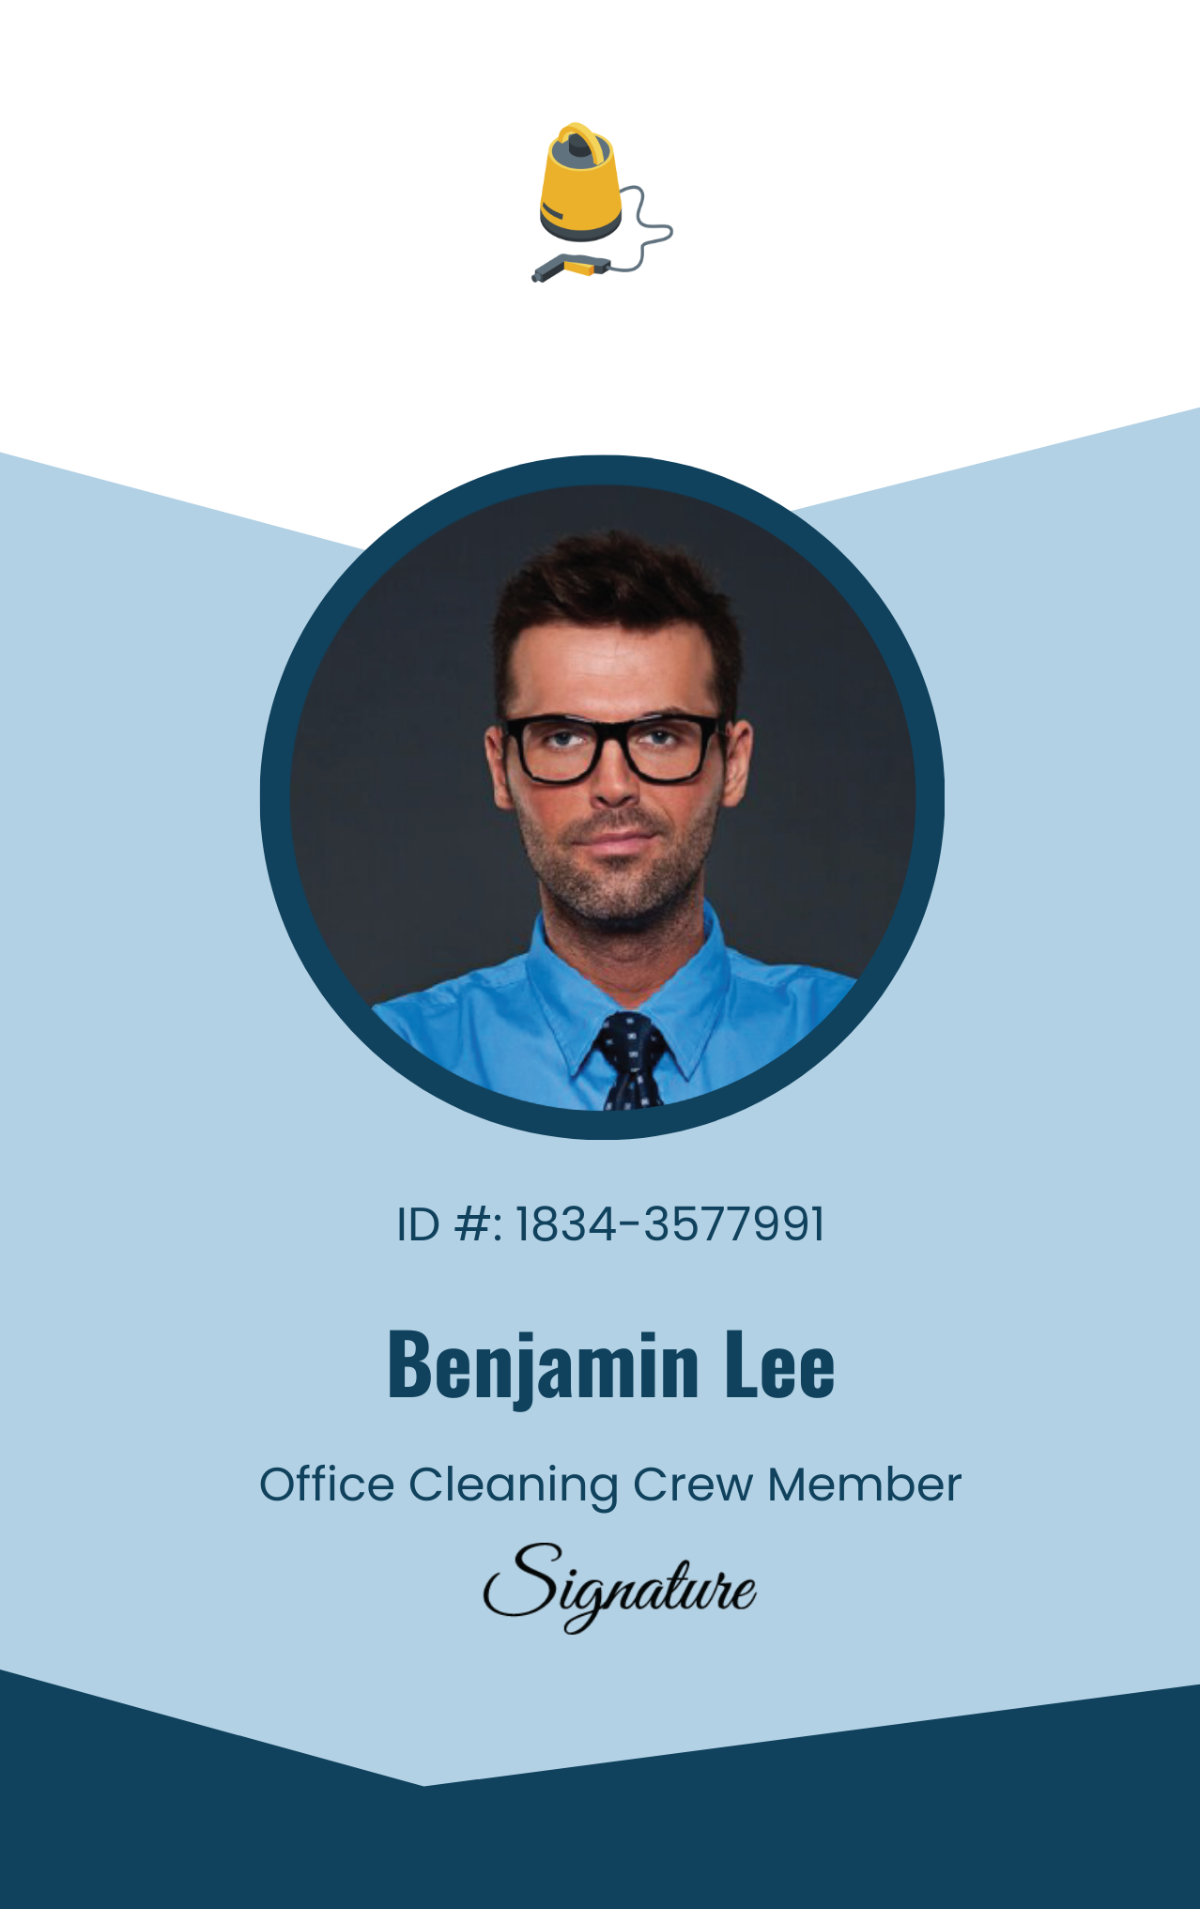 Office Cleaning Crew Member ID Card